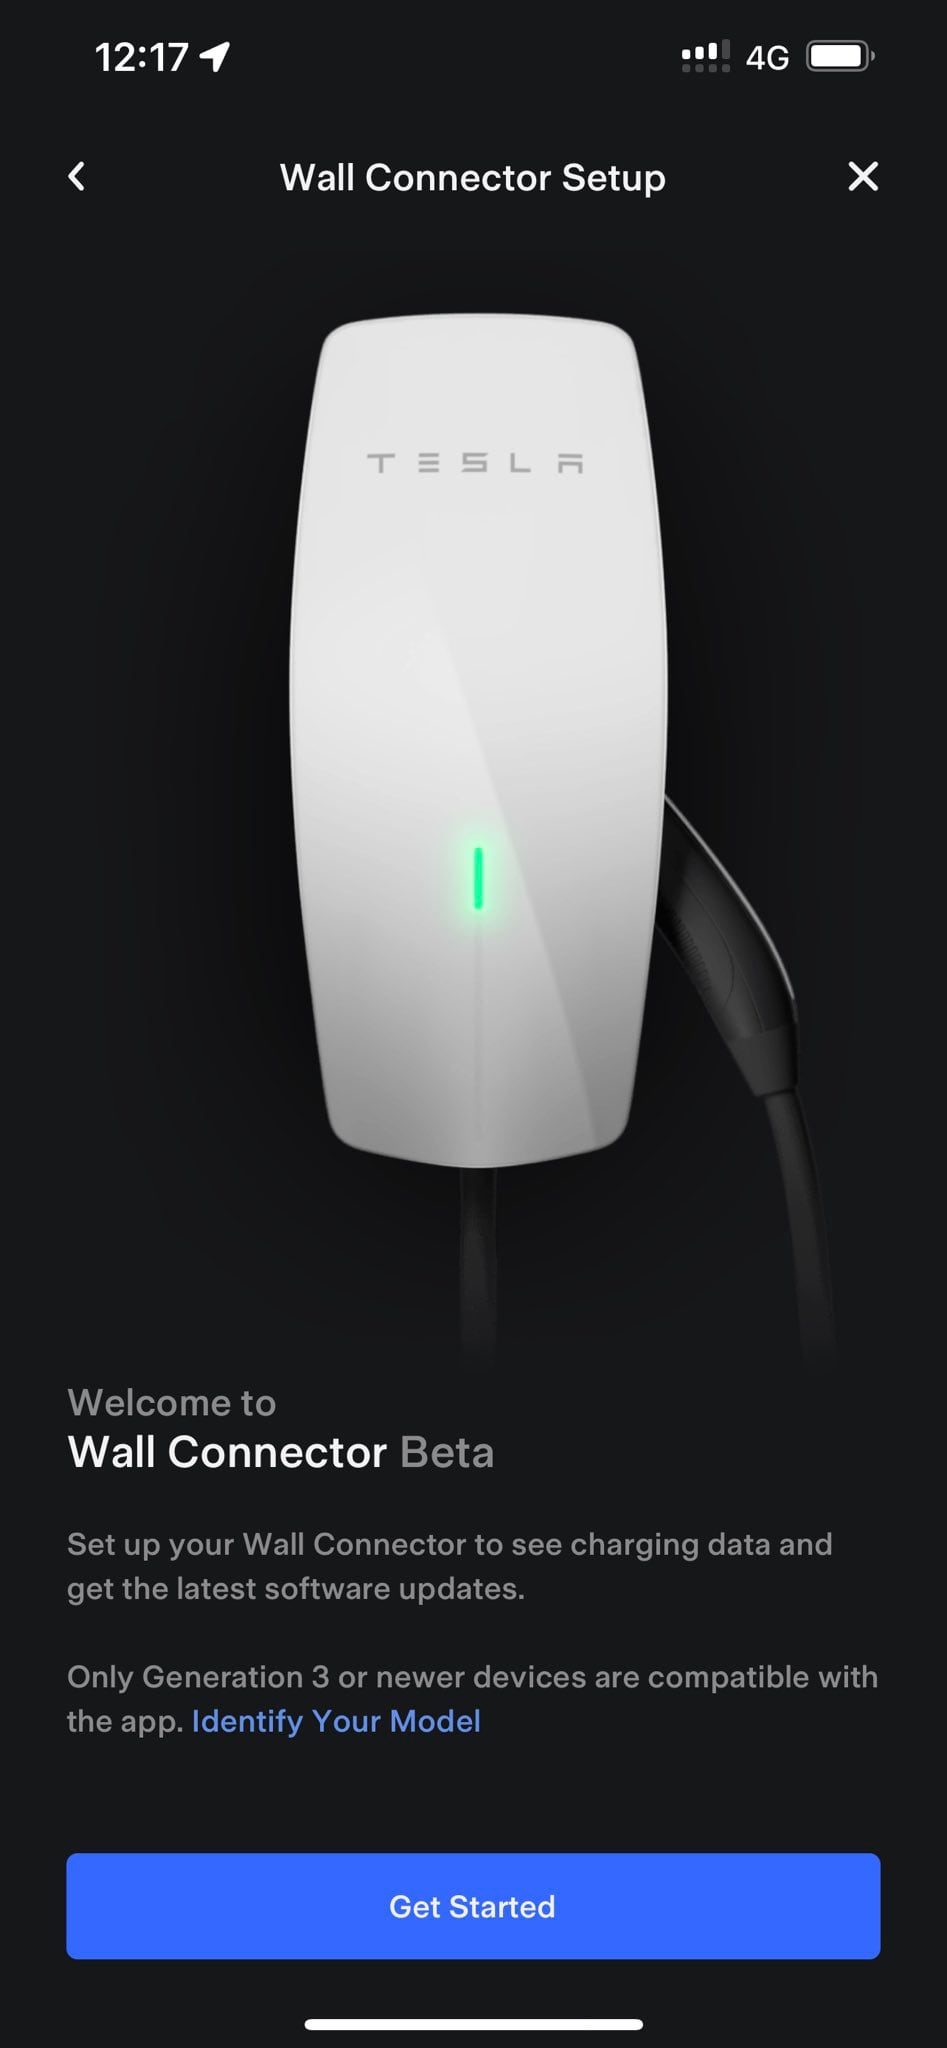 Tesla lets you connect your wall jack to the app